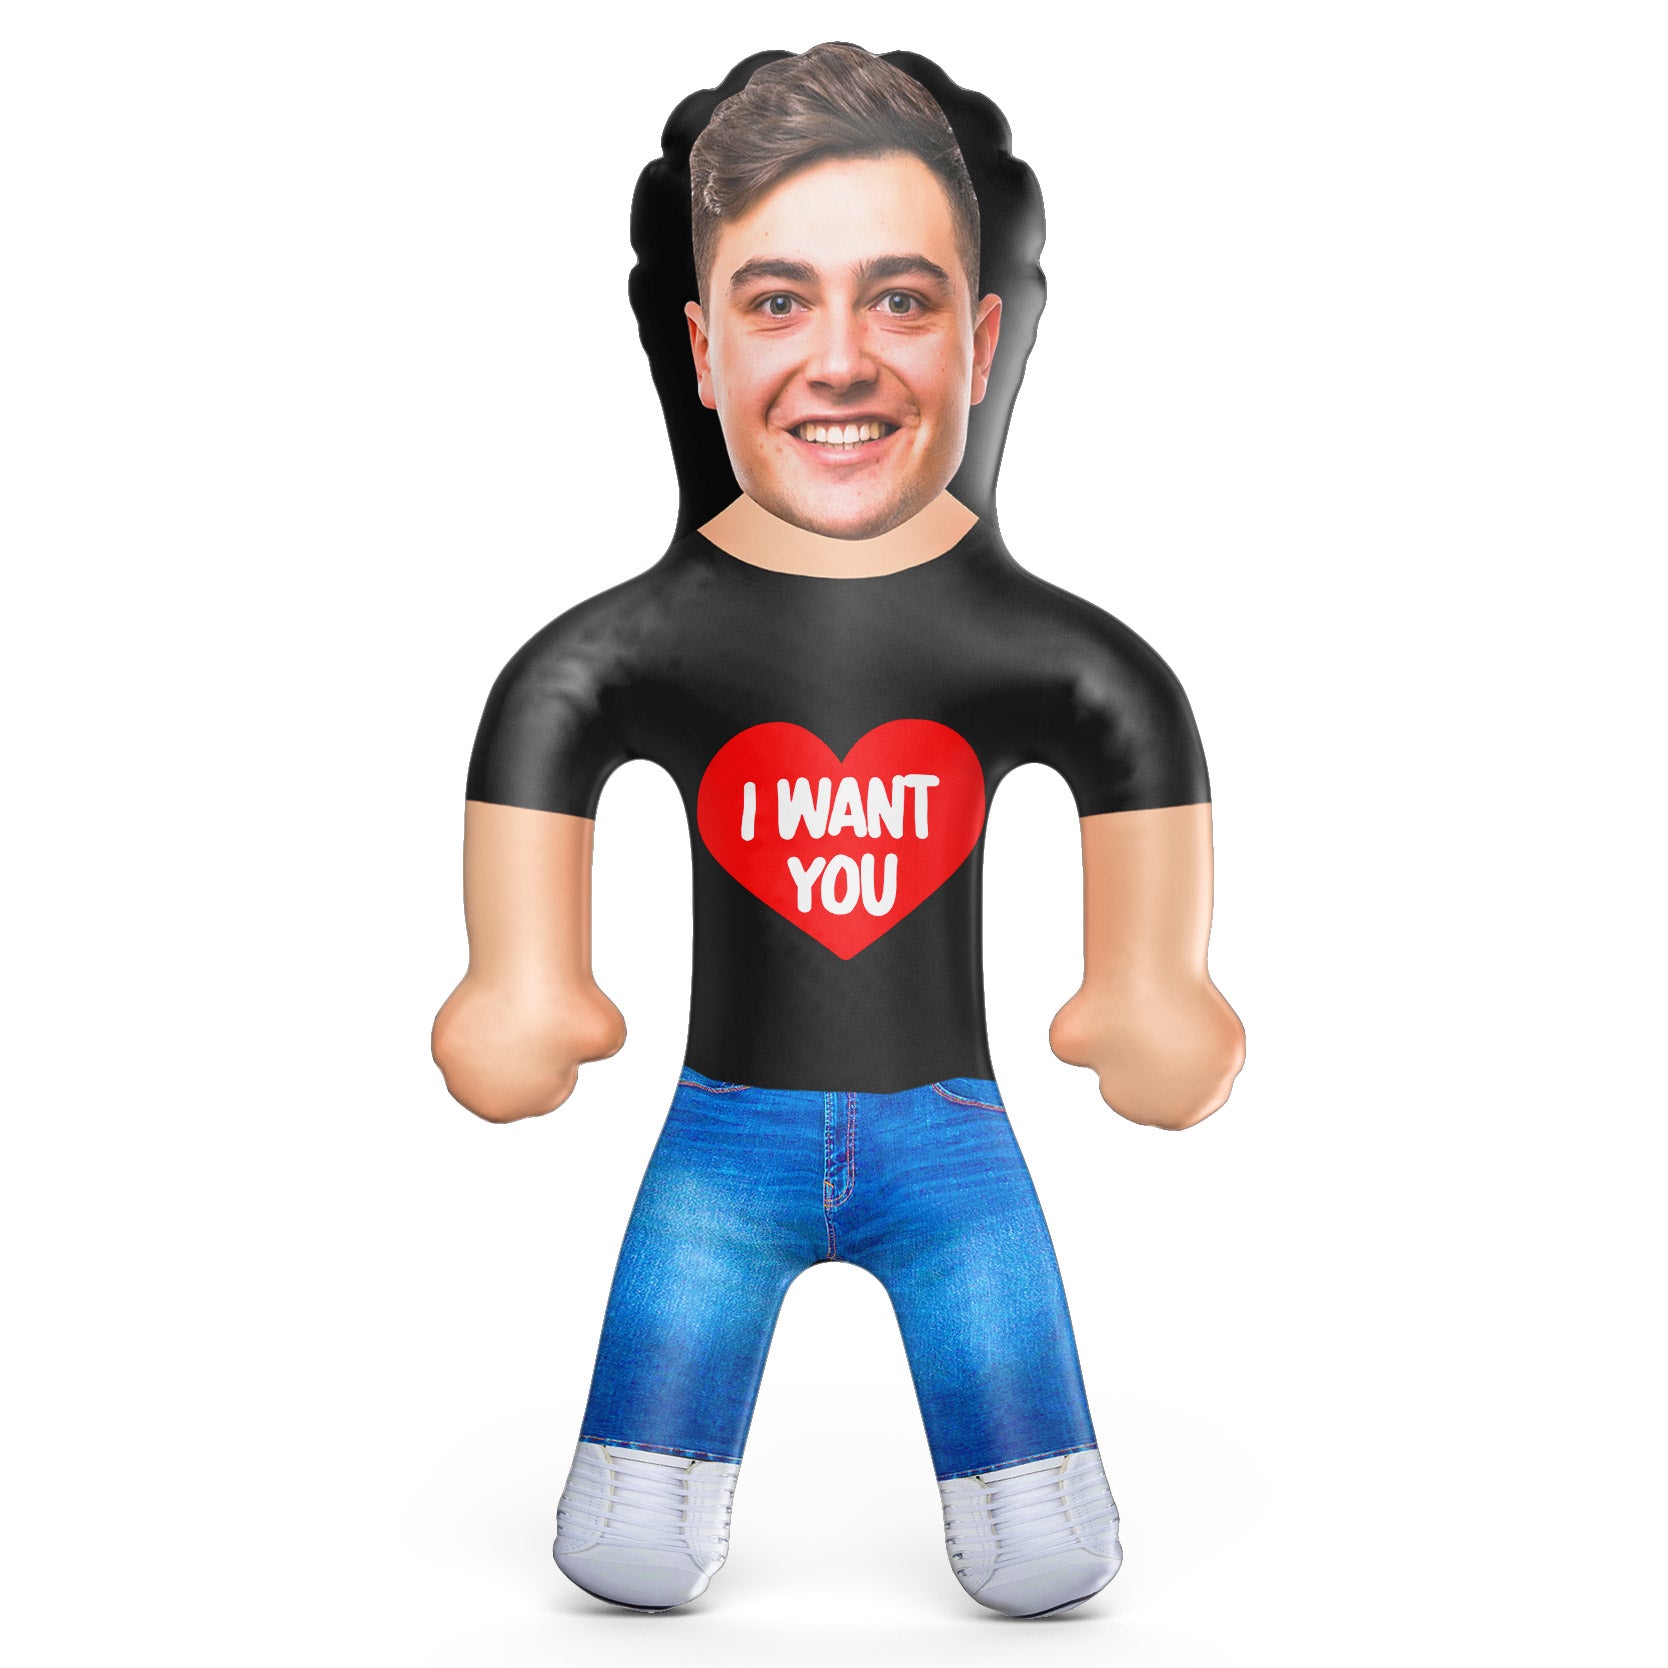 I Want You Inflatable Doll - I Want You Blow Up Doll